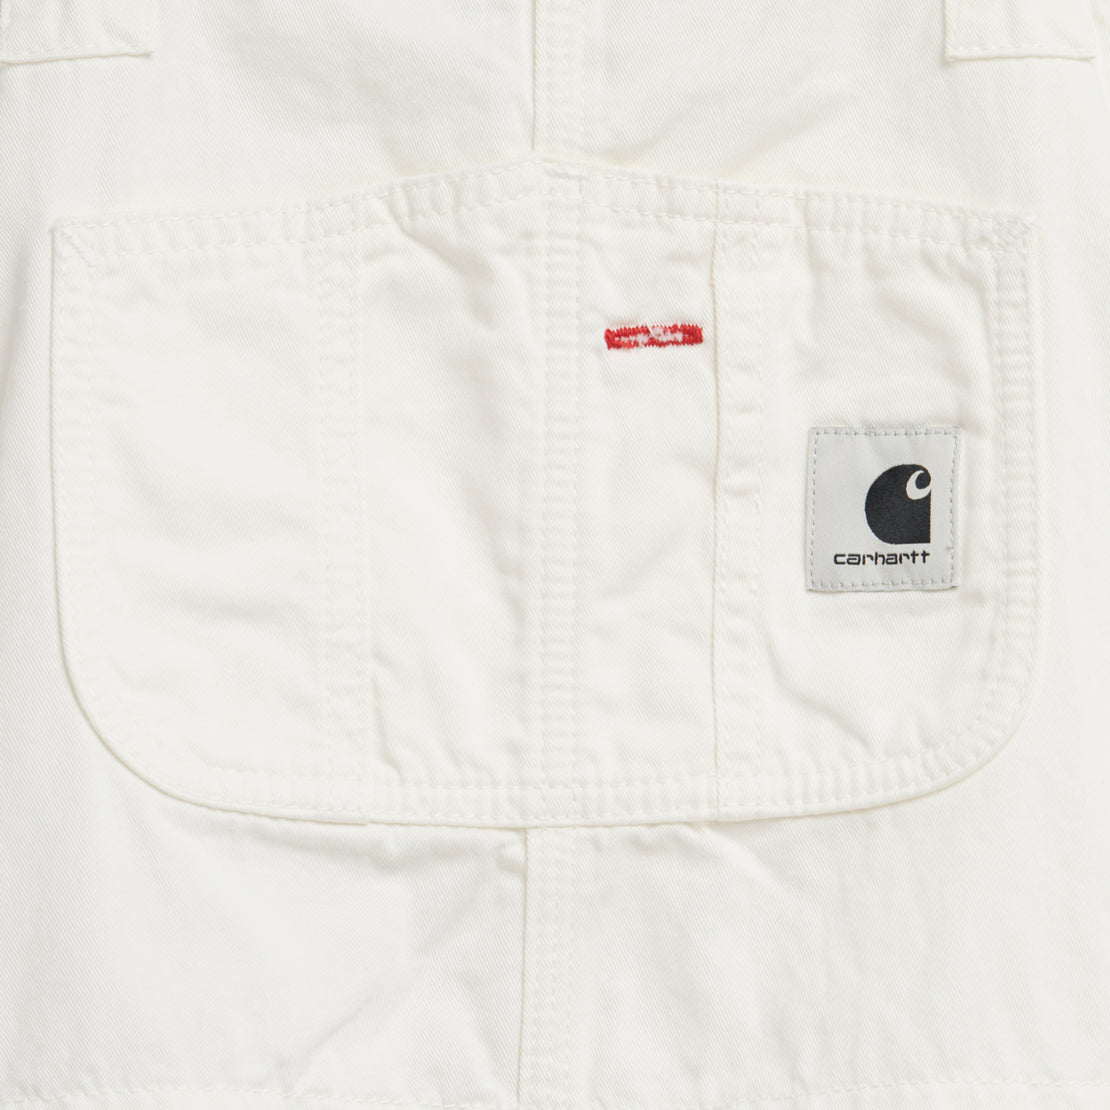 Bib Overall Straight - Off White - Carhartt WIP - STAG Provisions - W - Onepiece - Overalls